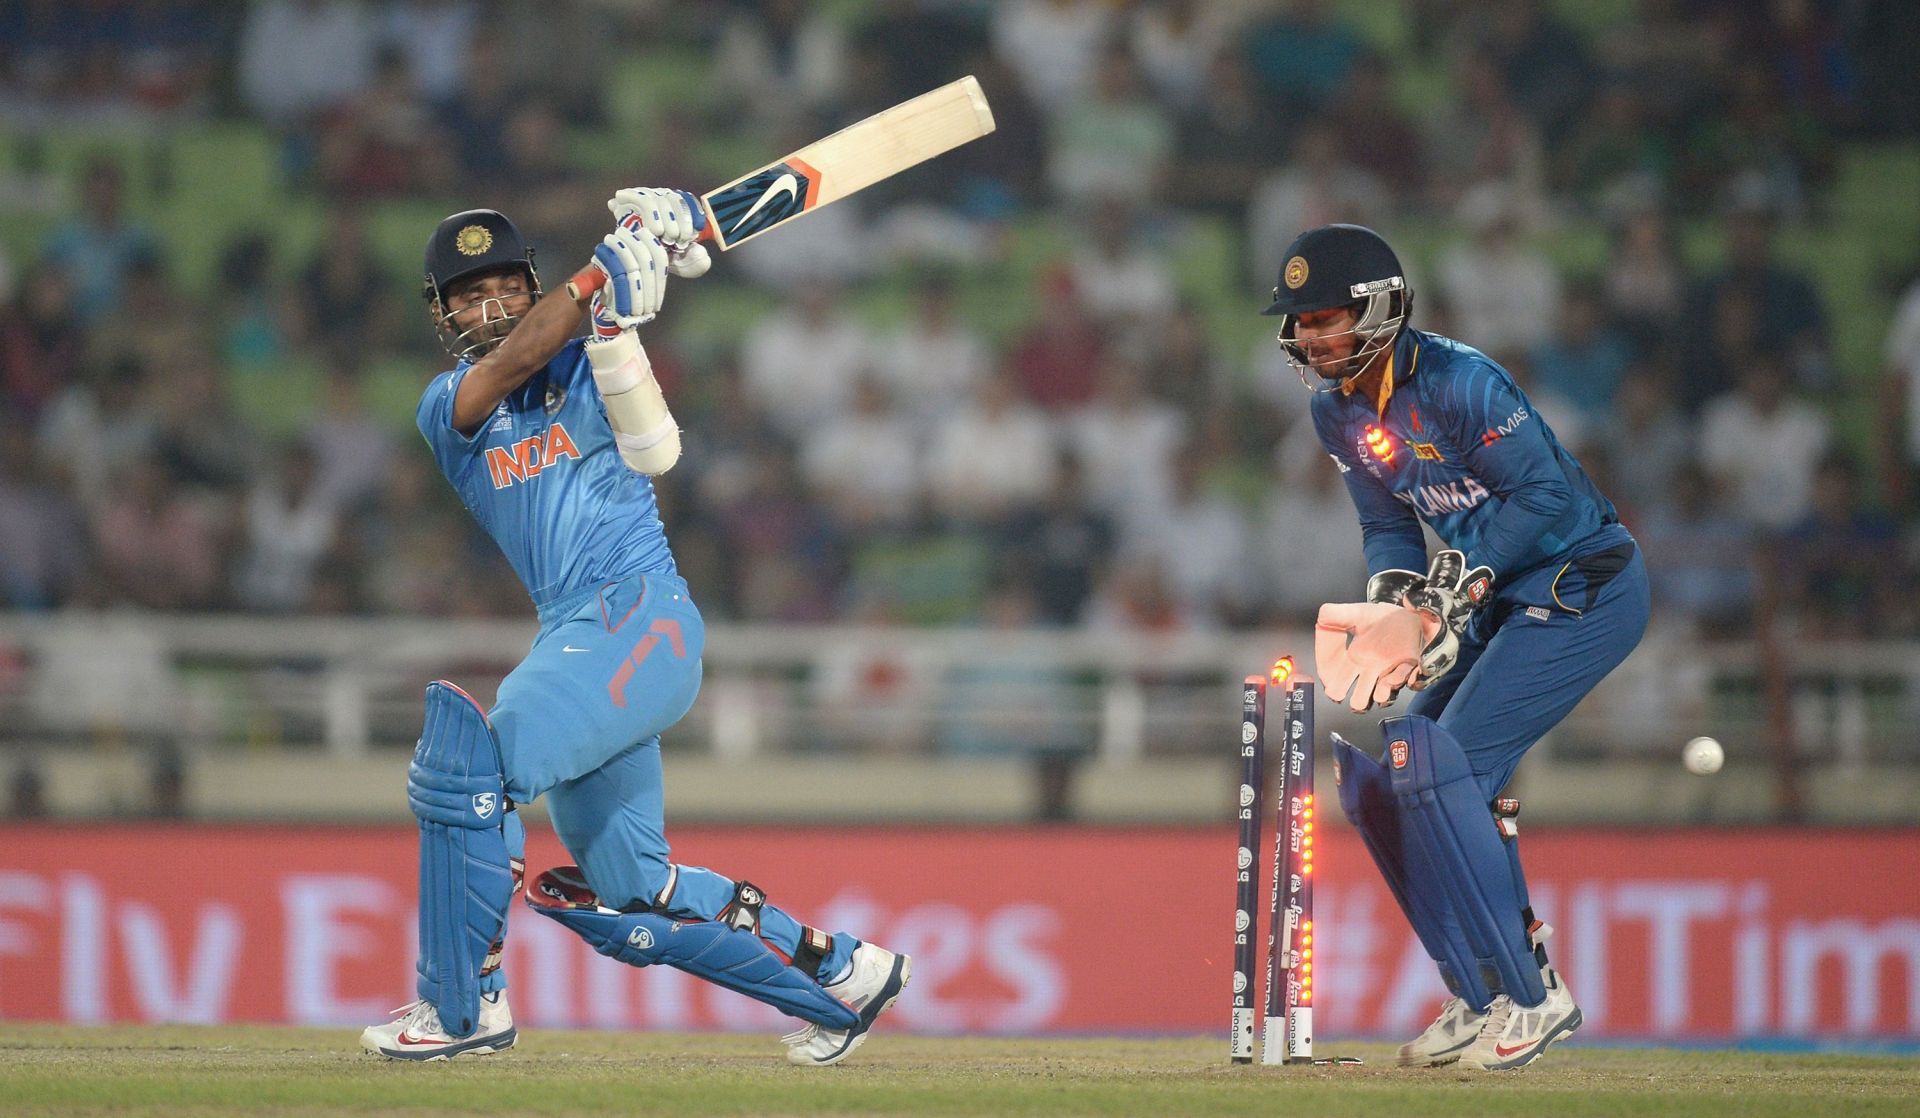 Rahane was cleaned up by Angelo Matthews in the 2014 T20 World Cup final.